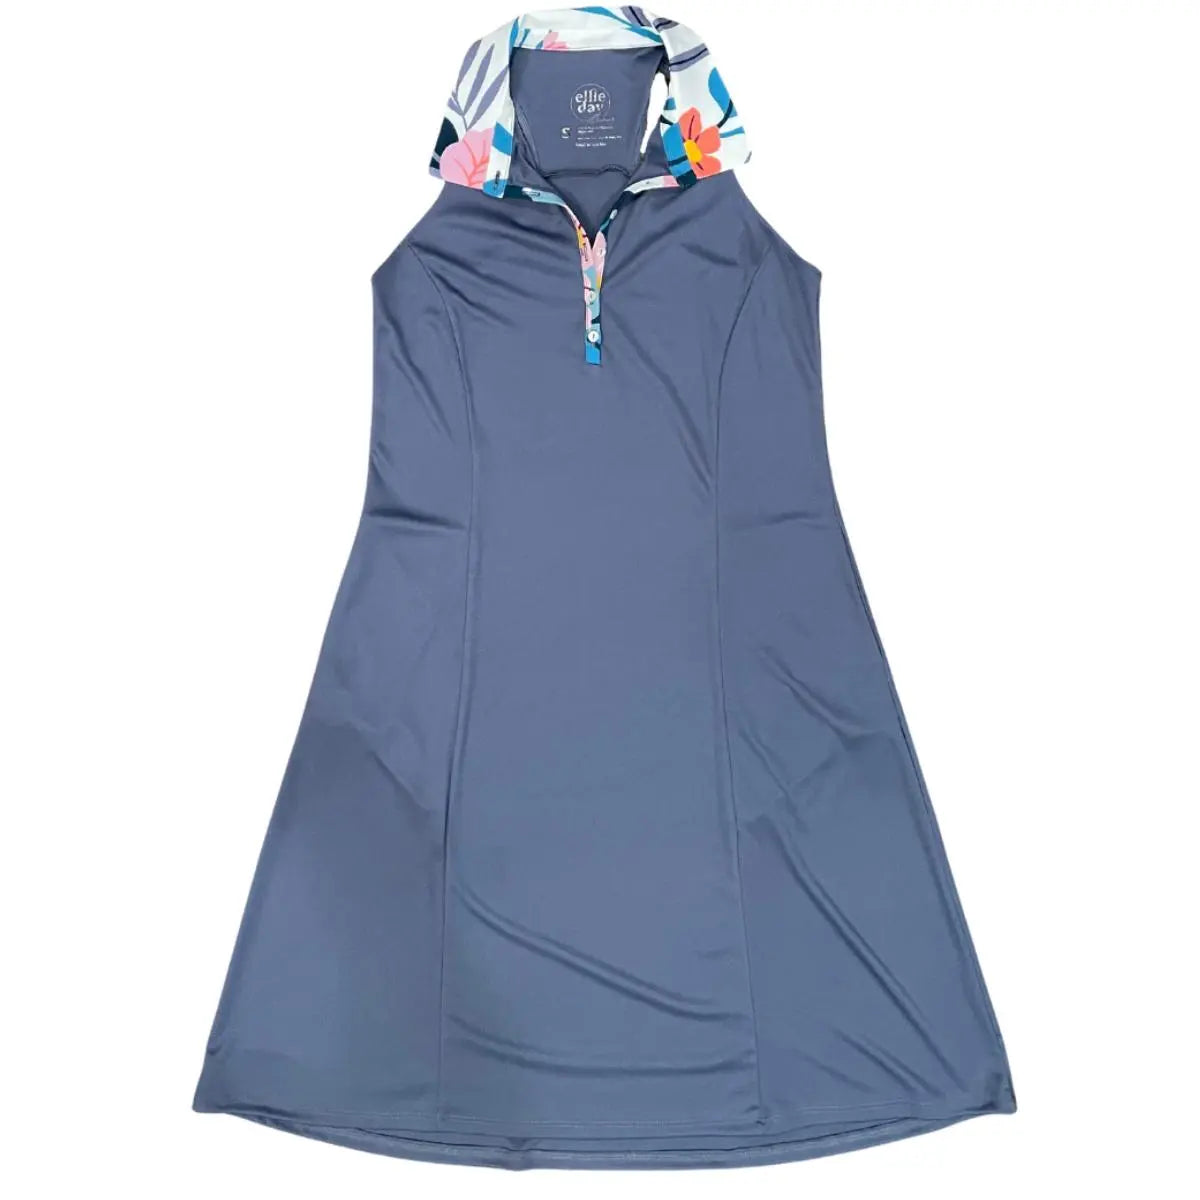 Racerback Activewear Dress With UPF Ellie Day